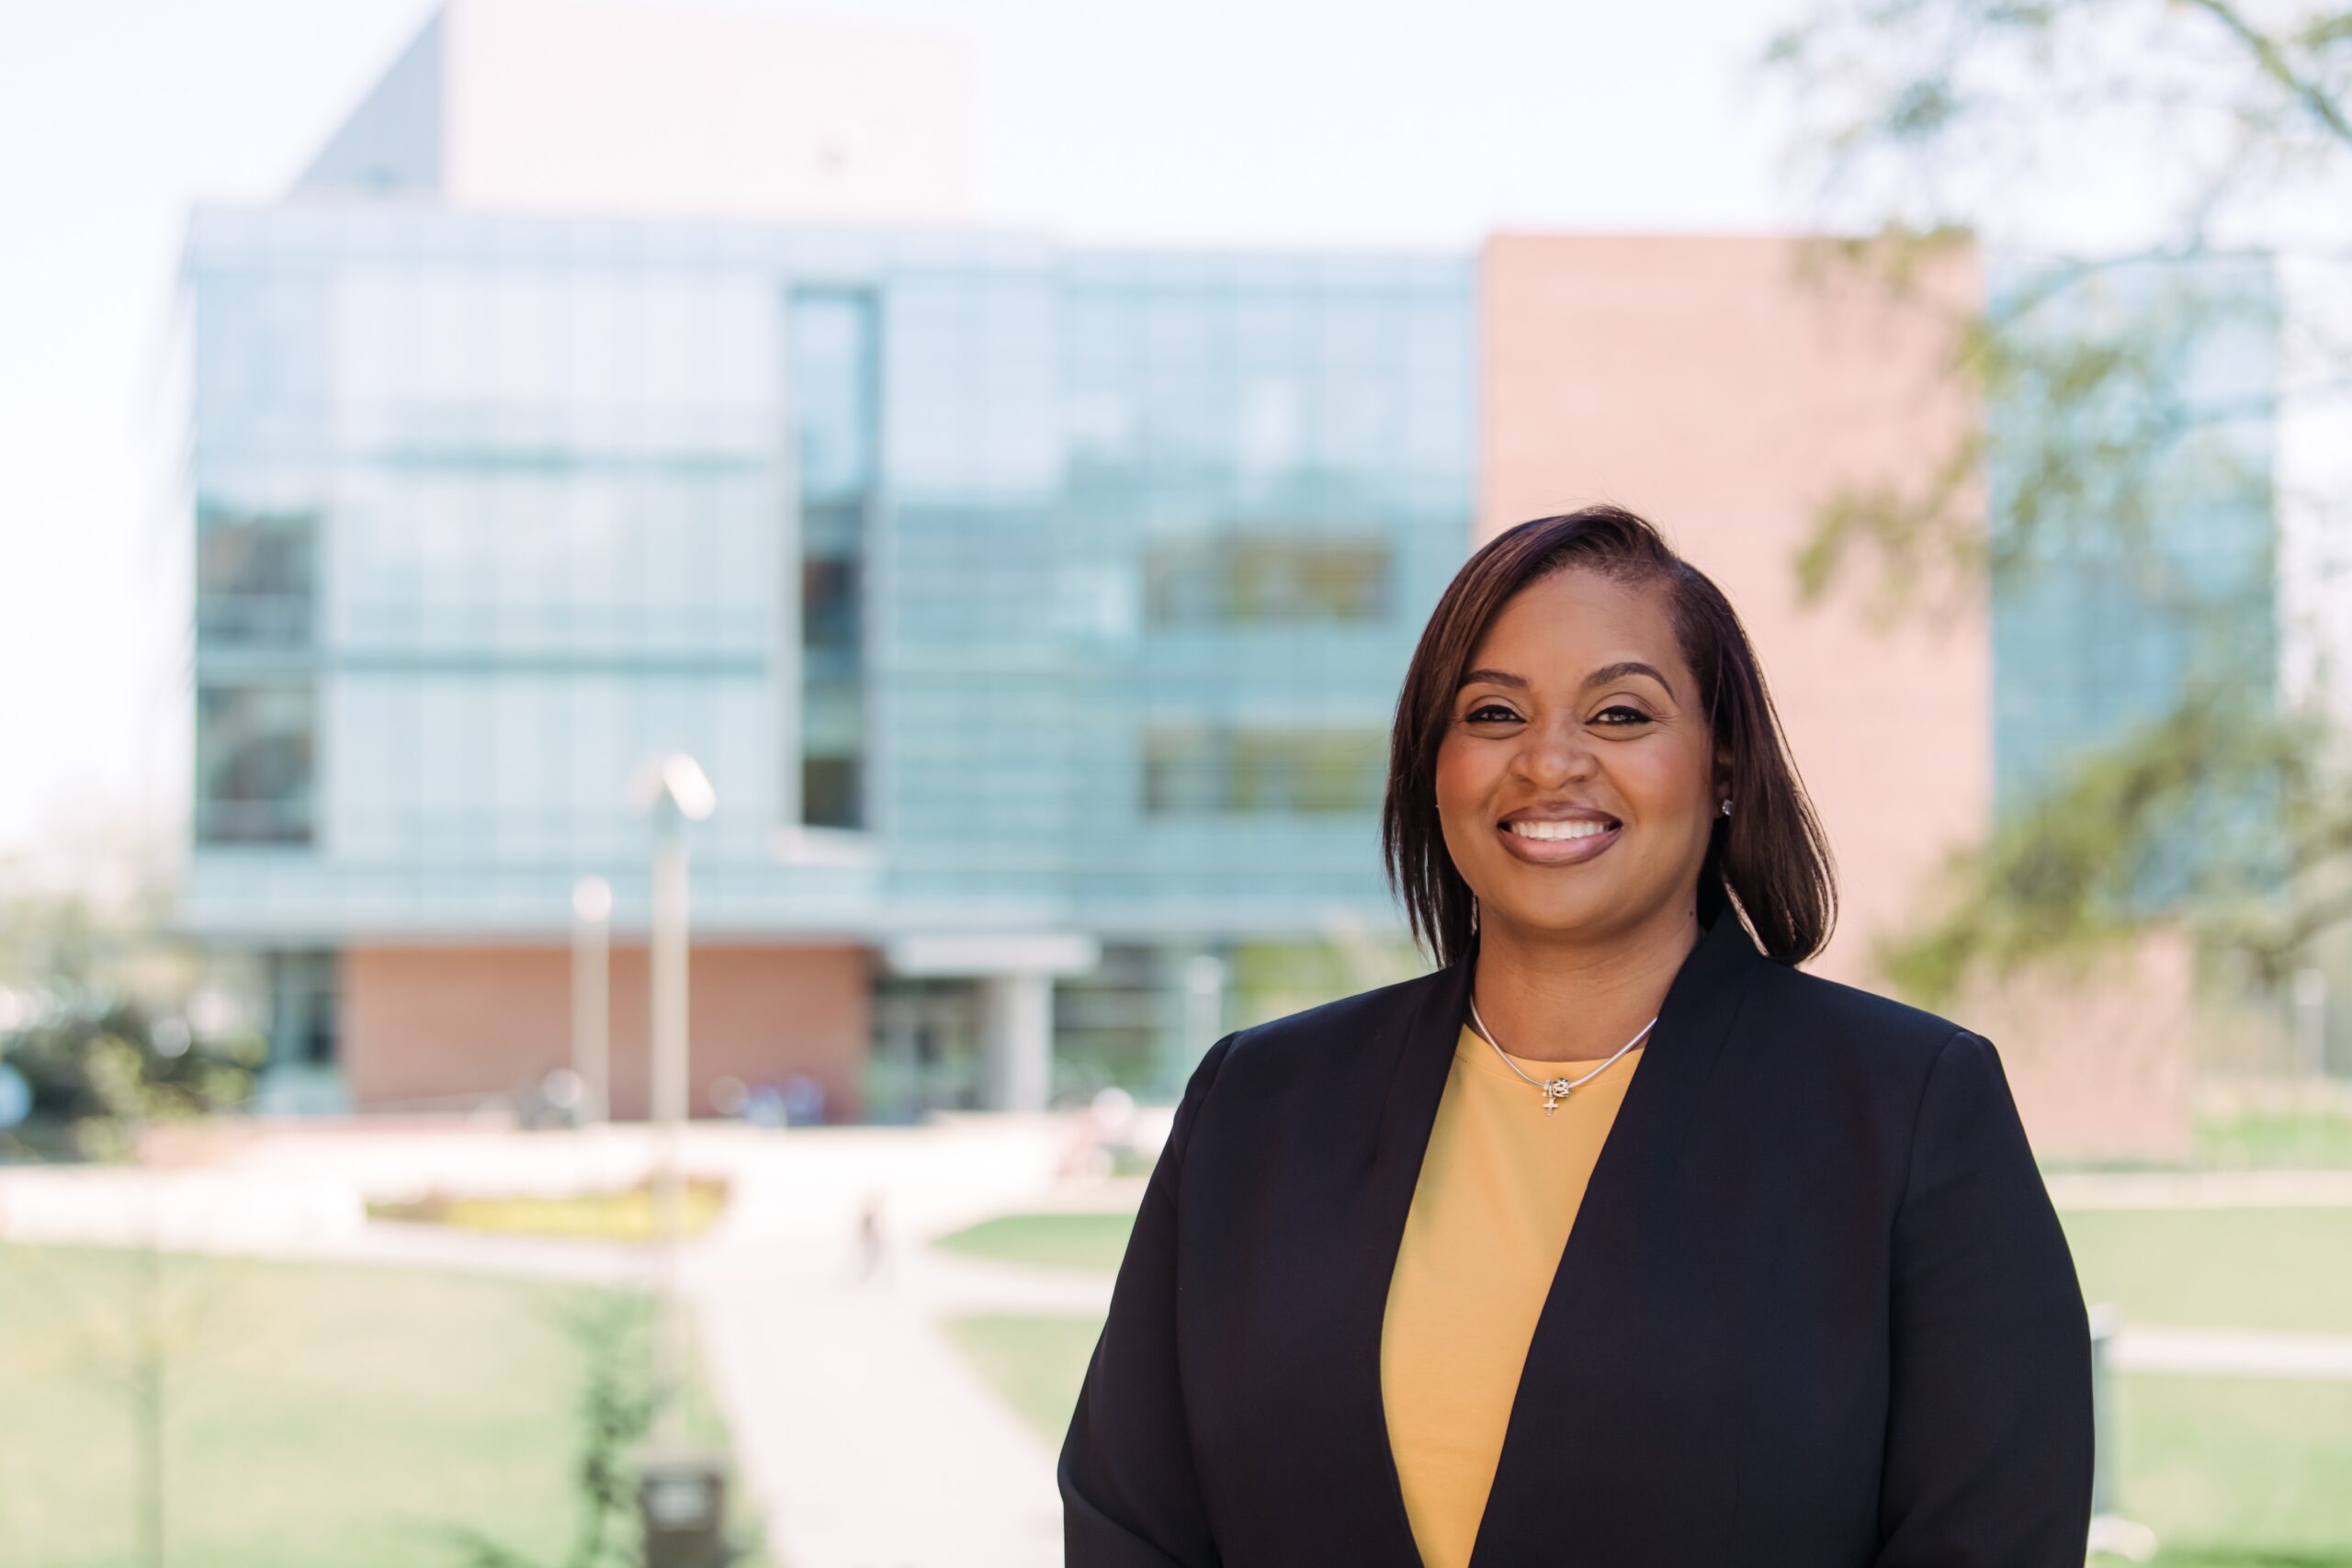 UMBC welcomes Tanyka M. Barber as vice president for institutional equity and chief diversity officer